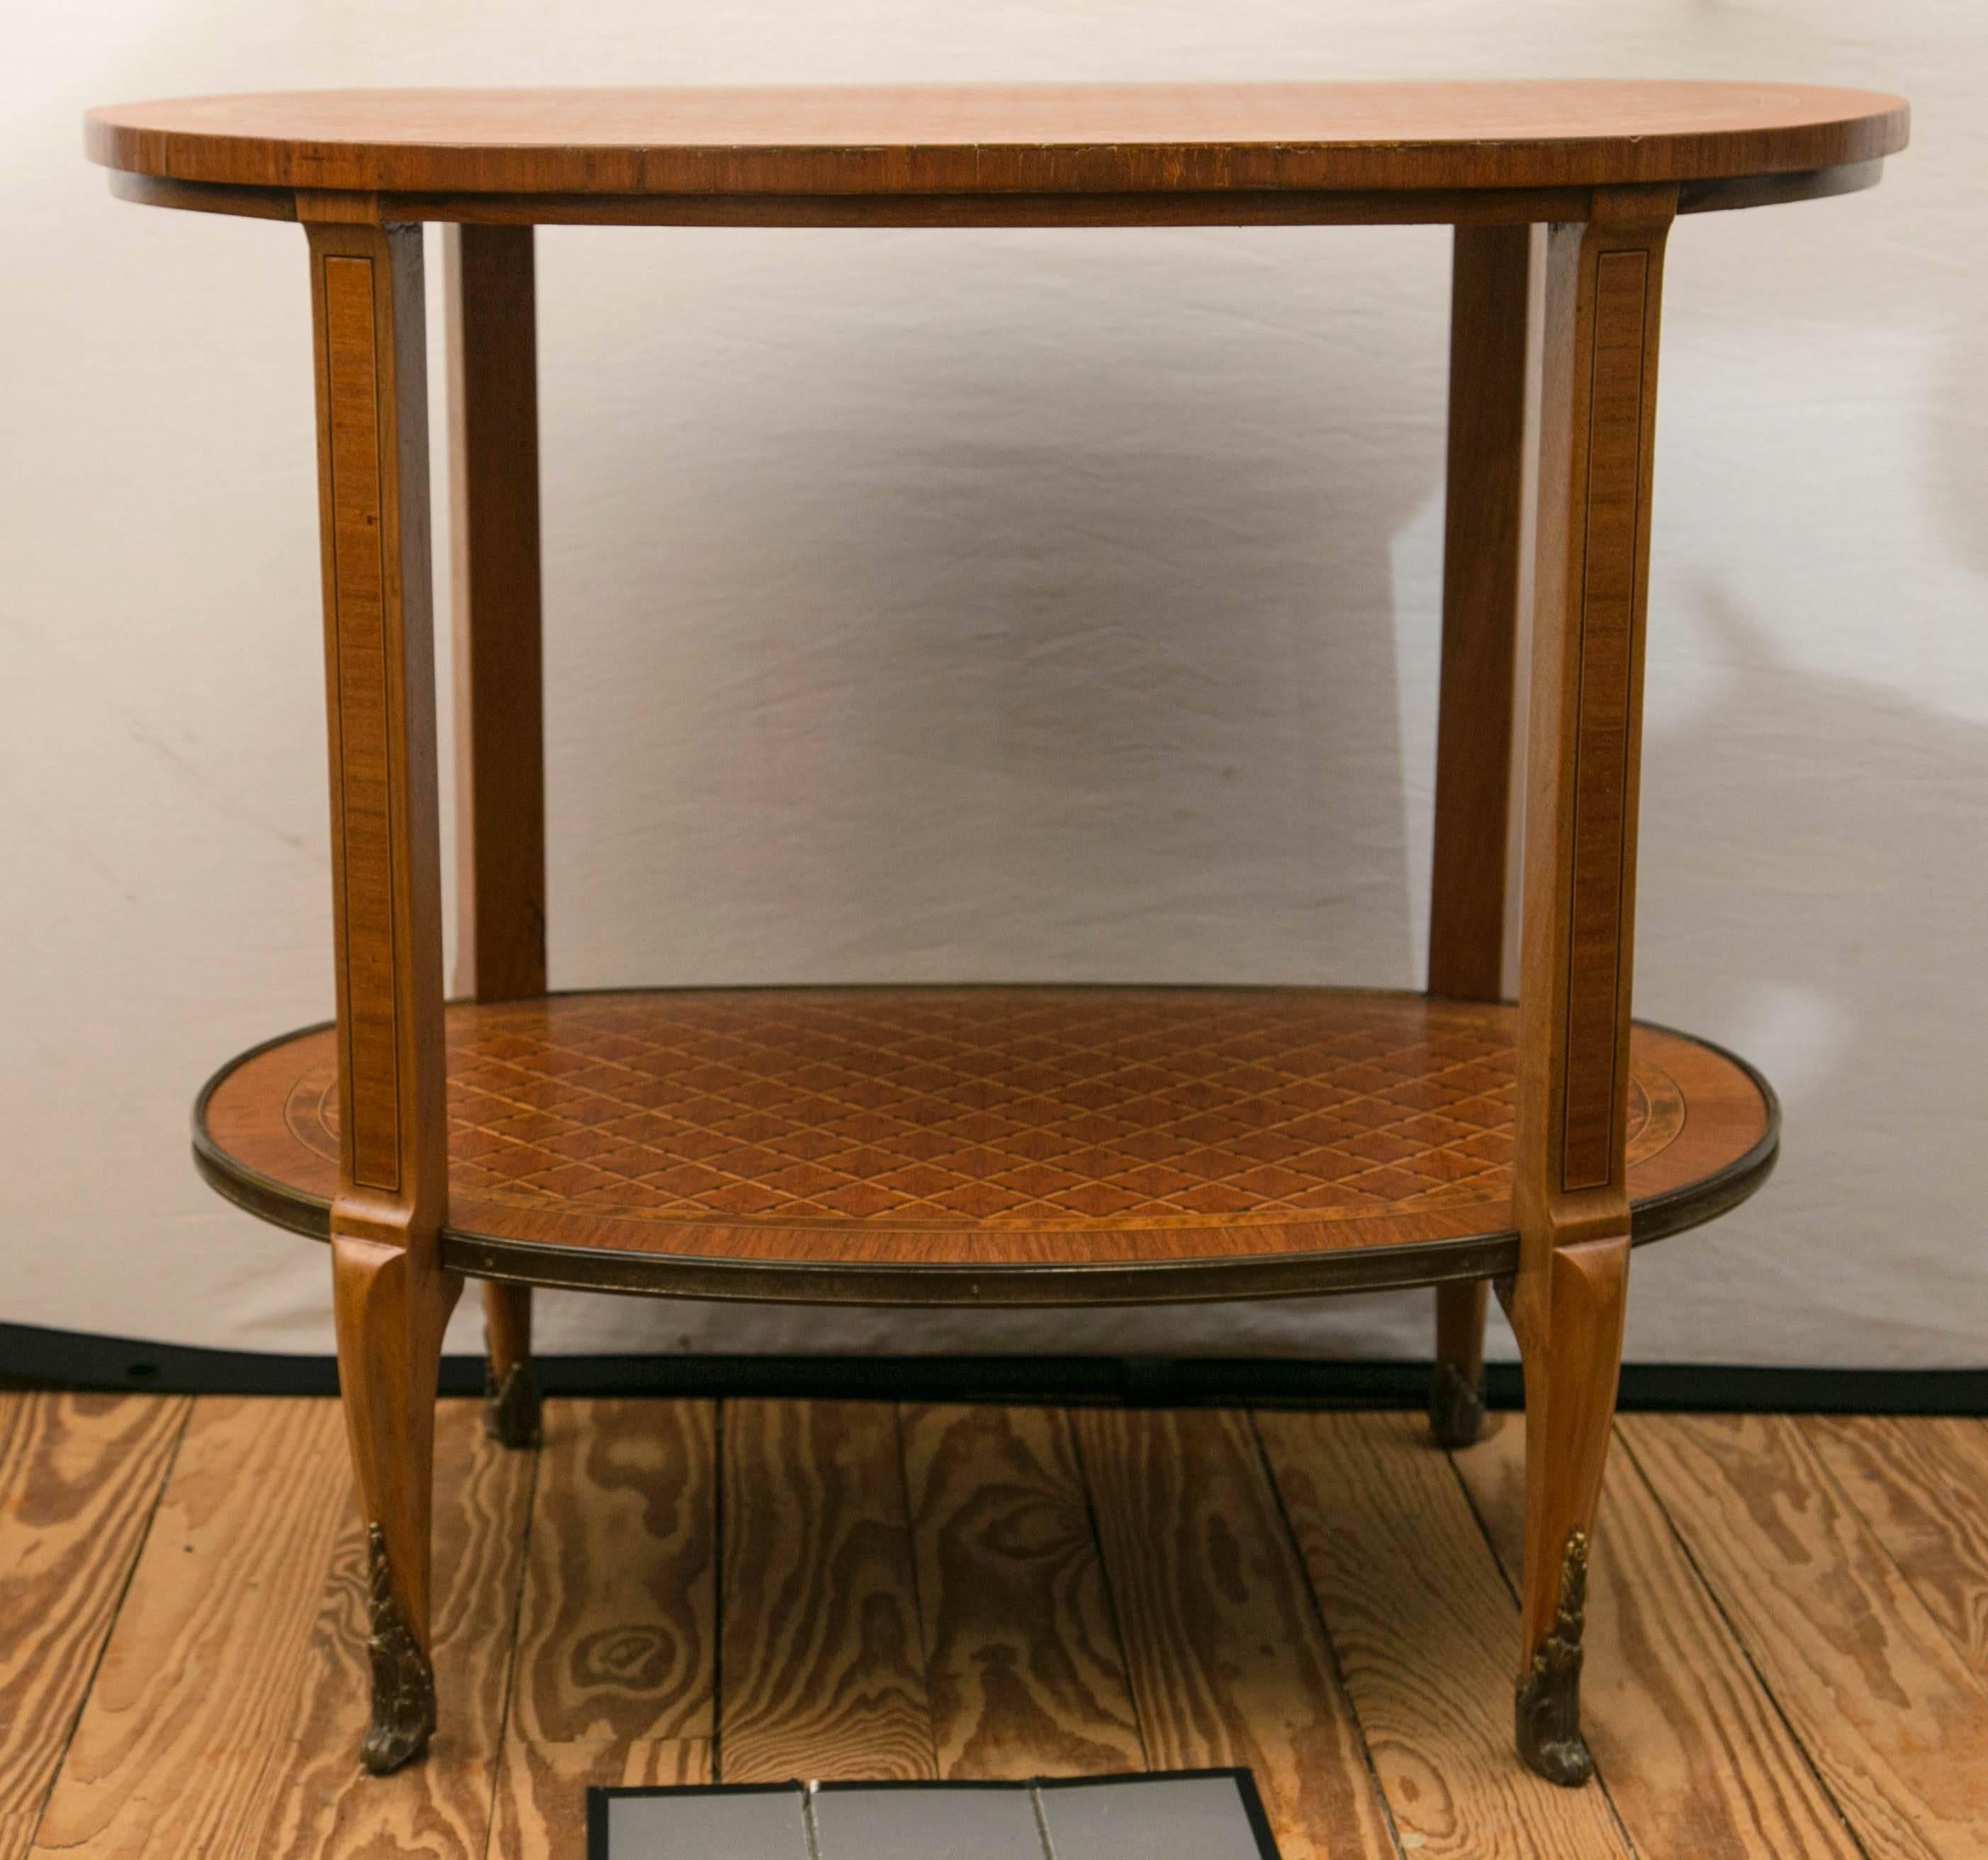 A fine reproduction two-tier oval side or end table. It is hand veneered parquetry with criss-crossing line of dark and light satinwood and ebony dots. The lower tier having a brass edge. Transitional style short legs ending in brass sabots.